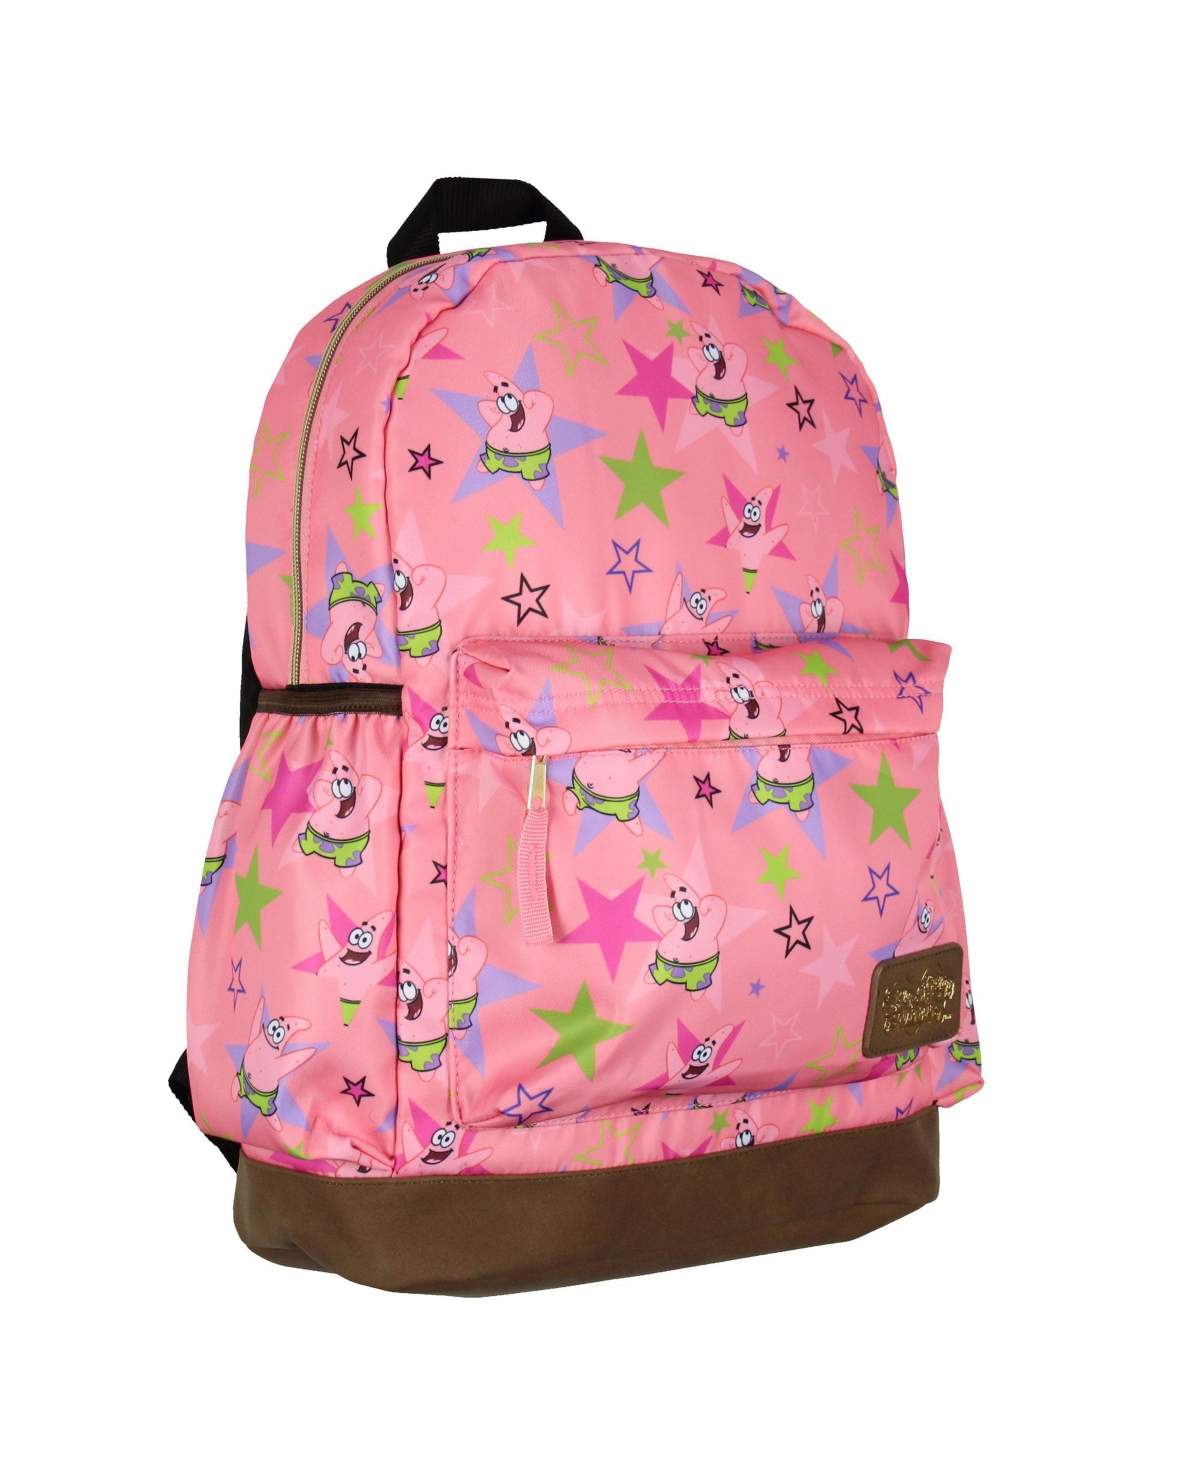 Nickelodeon Patrick Star School Travel Backpack With Faux Leather Bottom - Pink